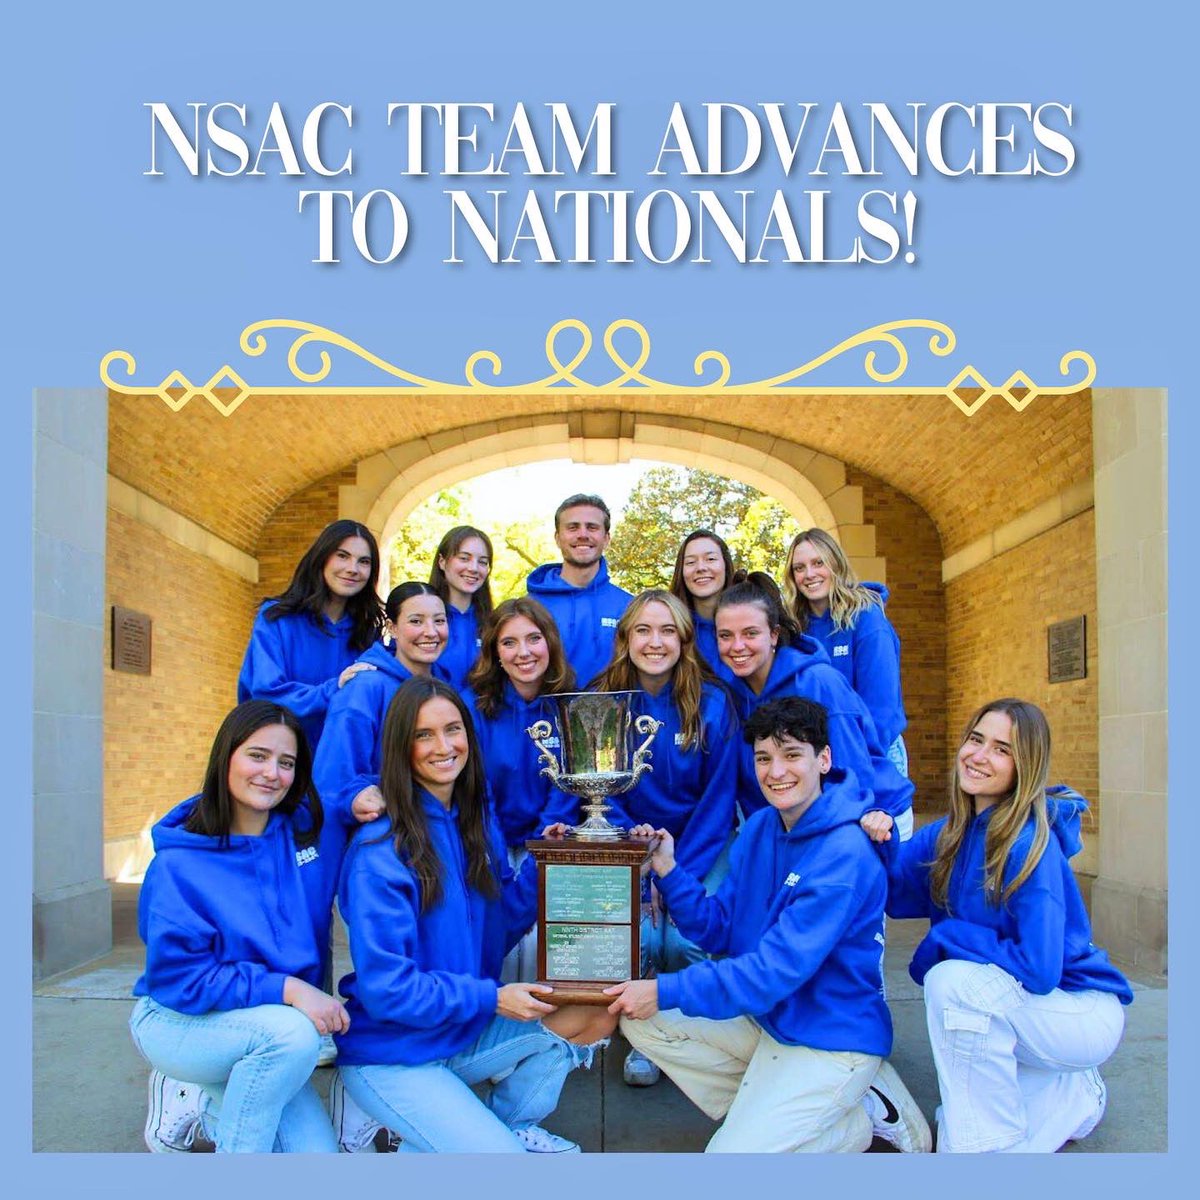 Congratulations to the 2023 NSAC Team who were one of 8 teams selected to compete at nationals! 🎉 The national competition takes place in St. Louis in June! Wish them luck 🐯 #mustratcomm